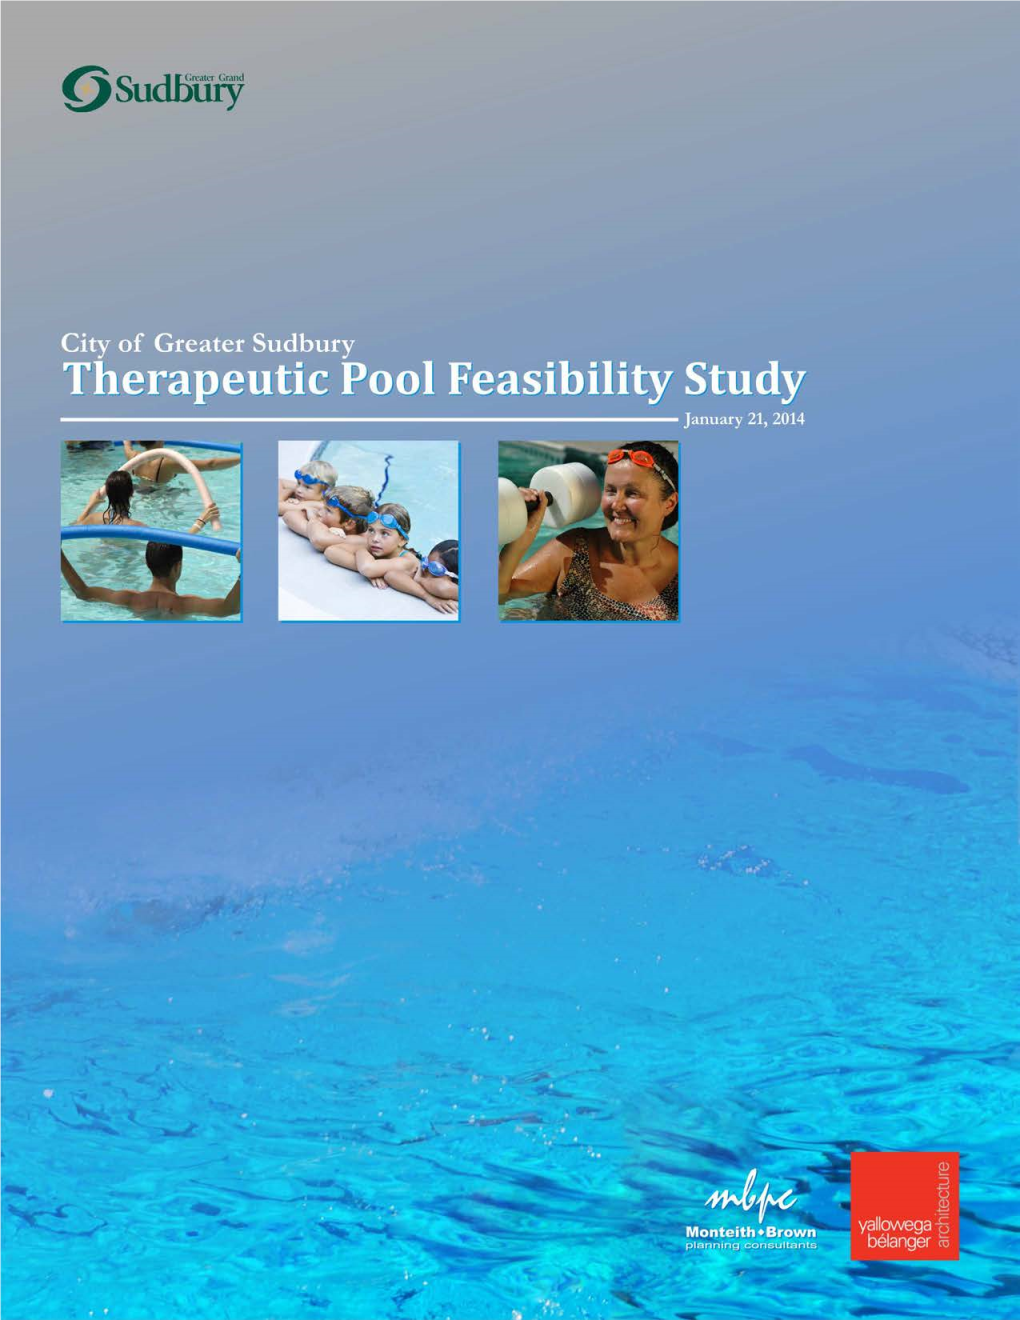 City of Greater Sudbury Therapeutic Pool Feasibility Study